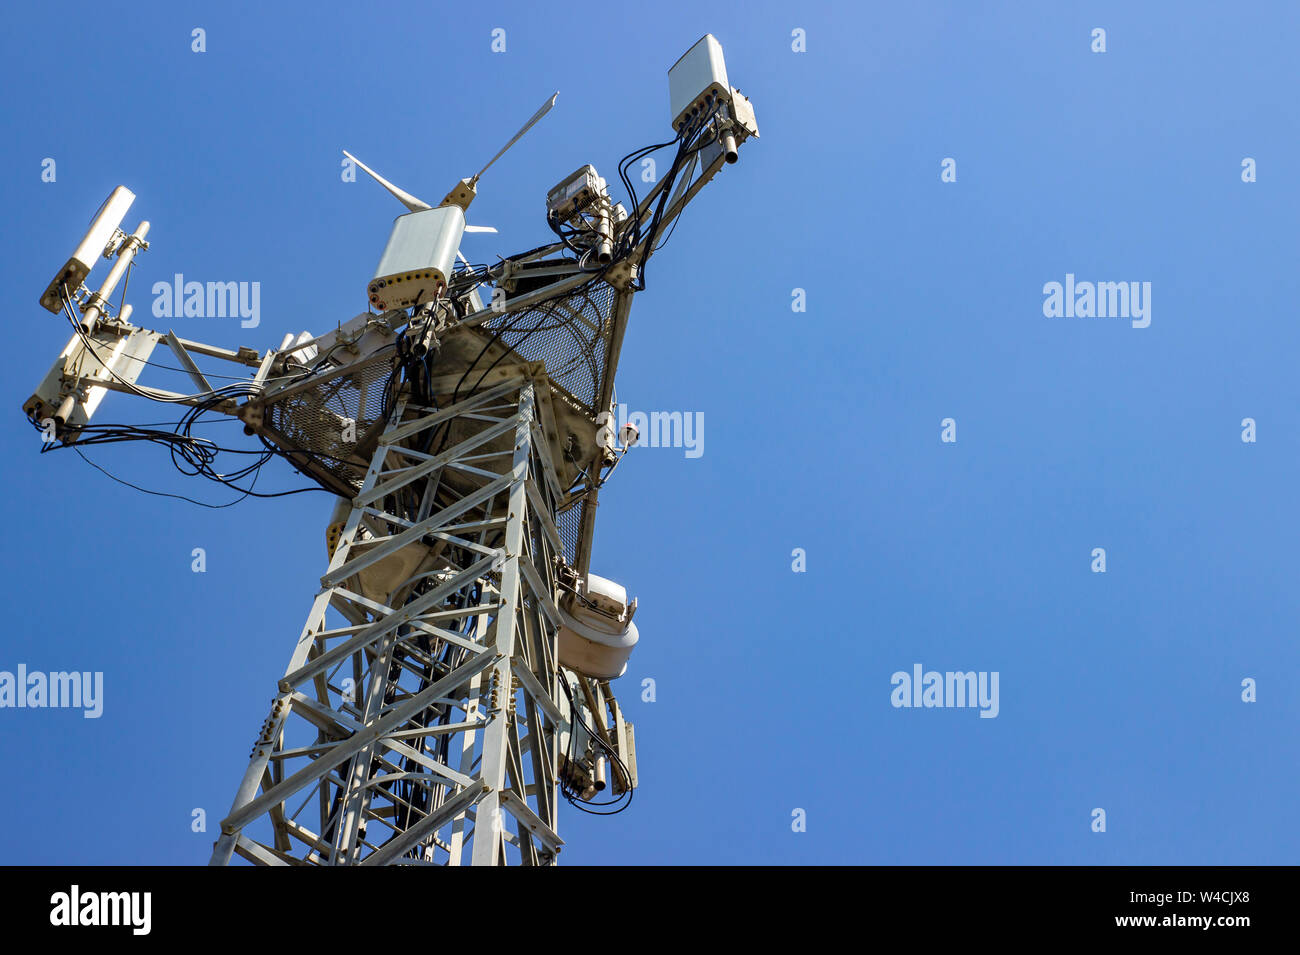 Cellular Base Station or Base Transceiver Station. Telecommunication tower. Wireless Communication Antenna Transmitter. 3G, 4G and 5G Cell Site with Stock Photo